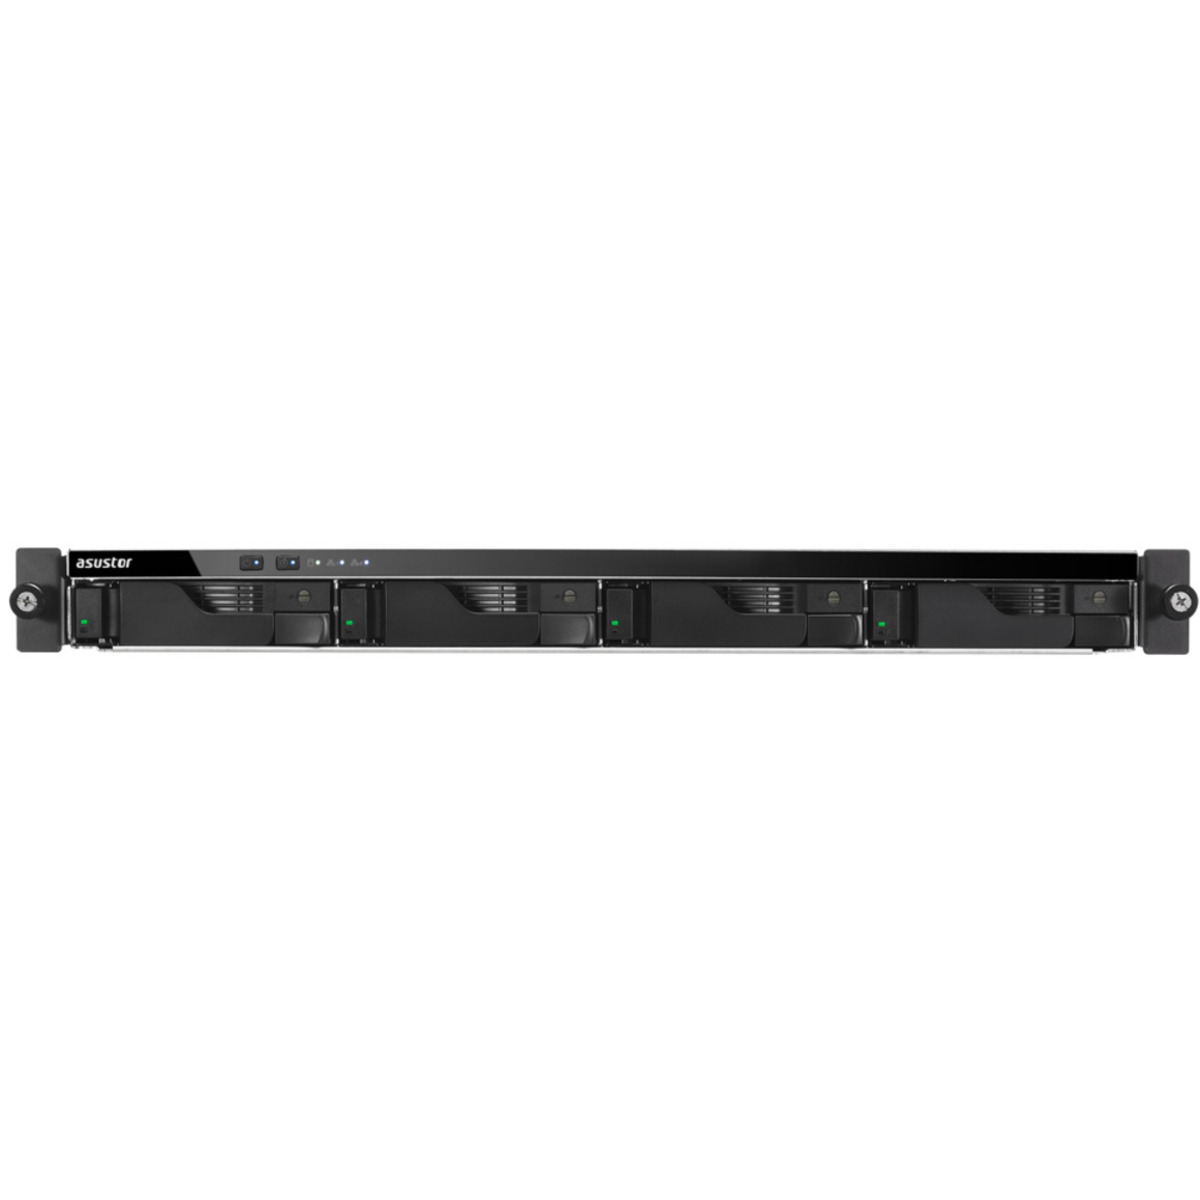 ASUSTOR LOCKERSTOR 4RD AS6504RD 16tb 4-Bay RackMount Multimedia / Power User / Business NAS - Network Attached Storage Device 4x4tb Western Digital Red Plus WD40EFPX 3.5 5400rpm SATA 6Gb/s HDD NAS Class Drives Installed - Burn-In Tested - FREE RAM UPGRADE LOCKERSTOR 4RD AS6504RD